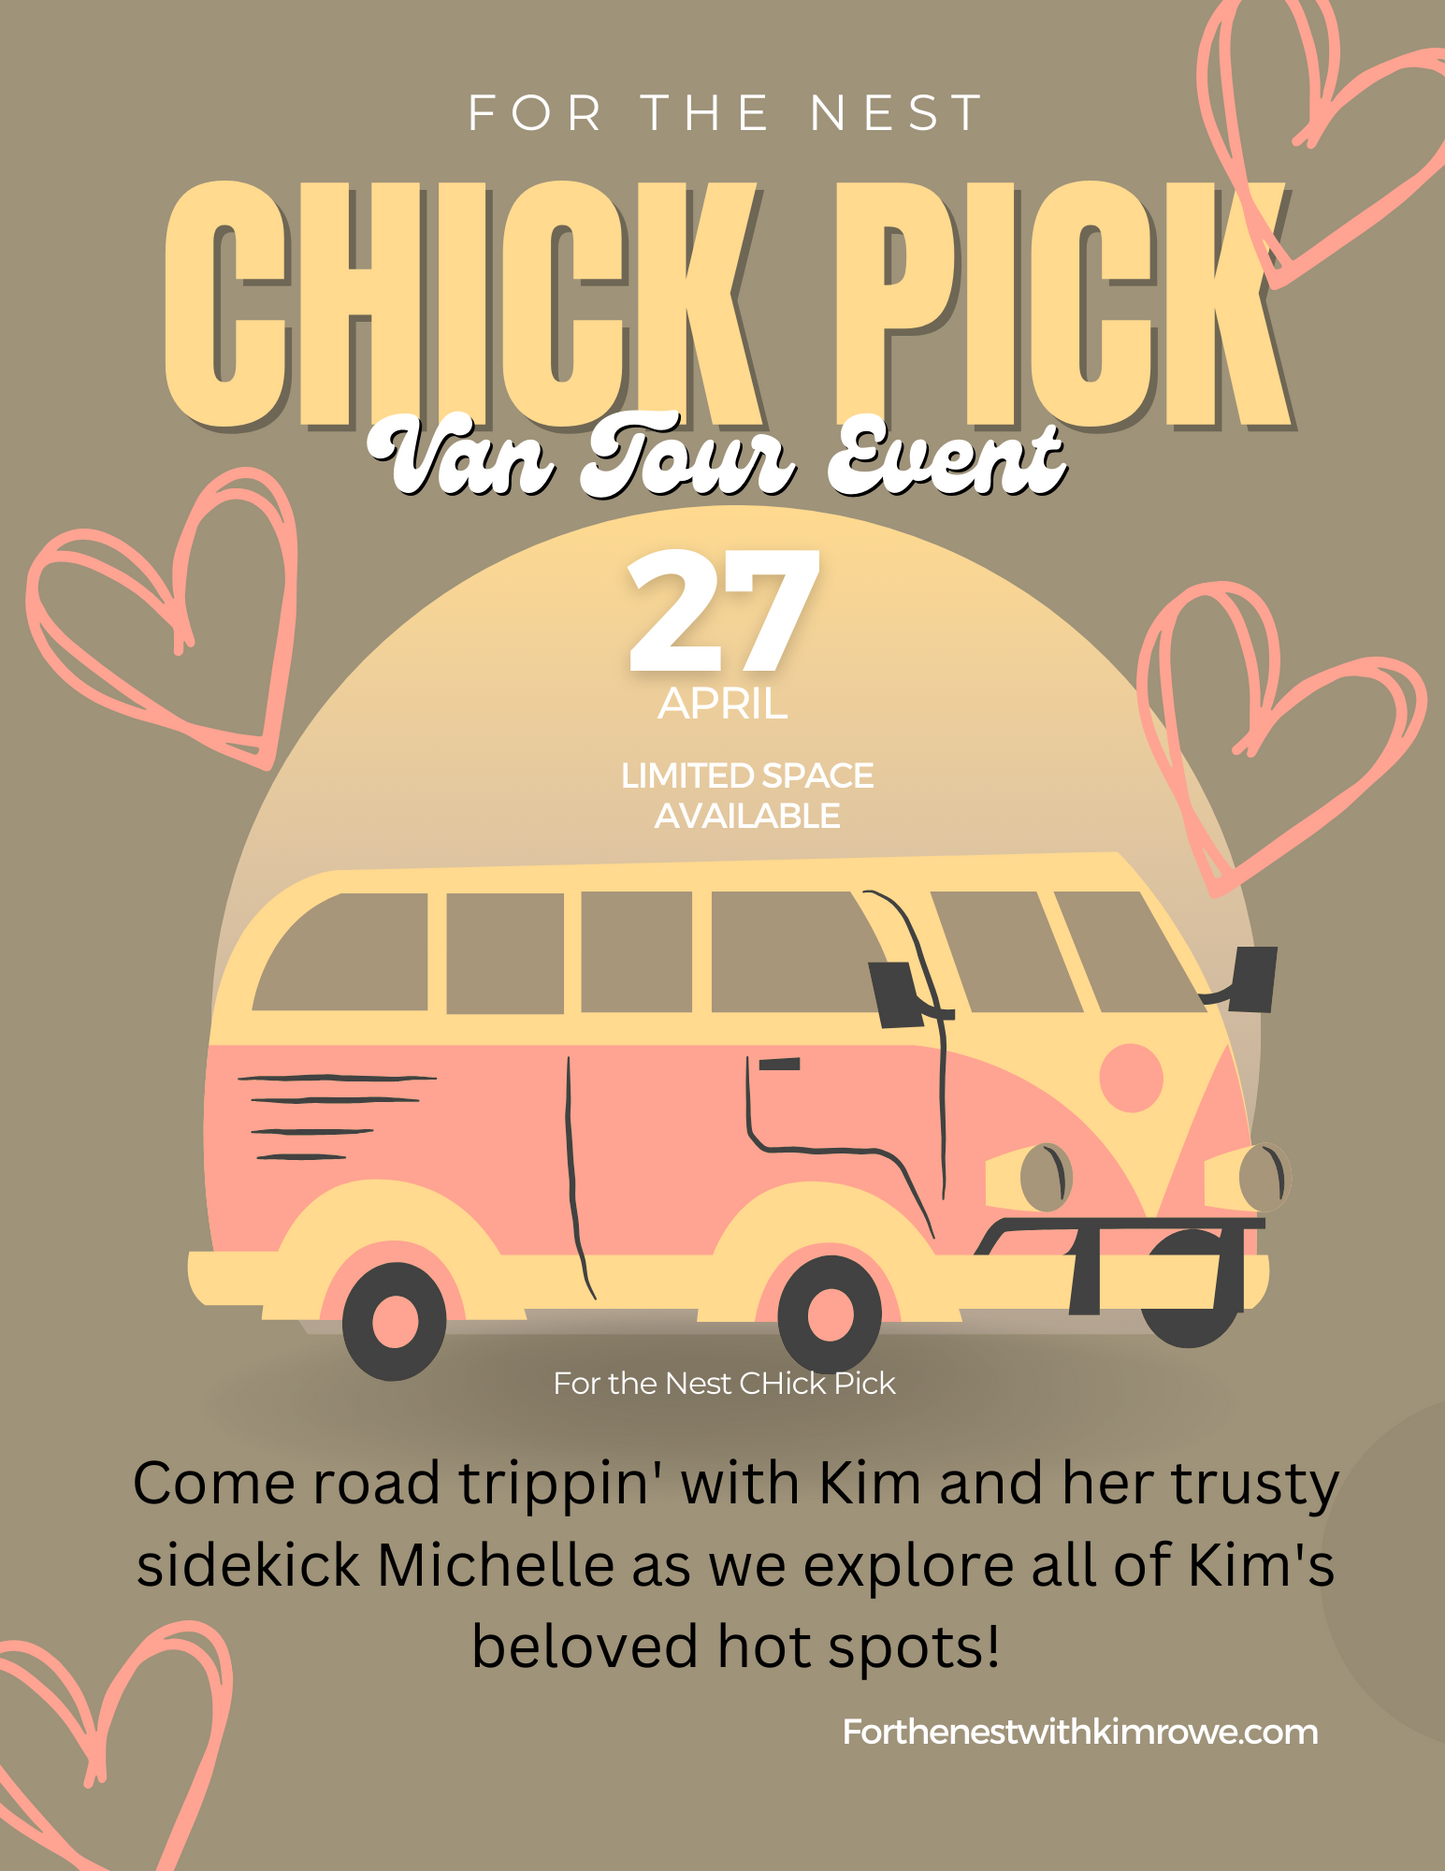 FOR THE NEST CHICK PICK VAN TOUR